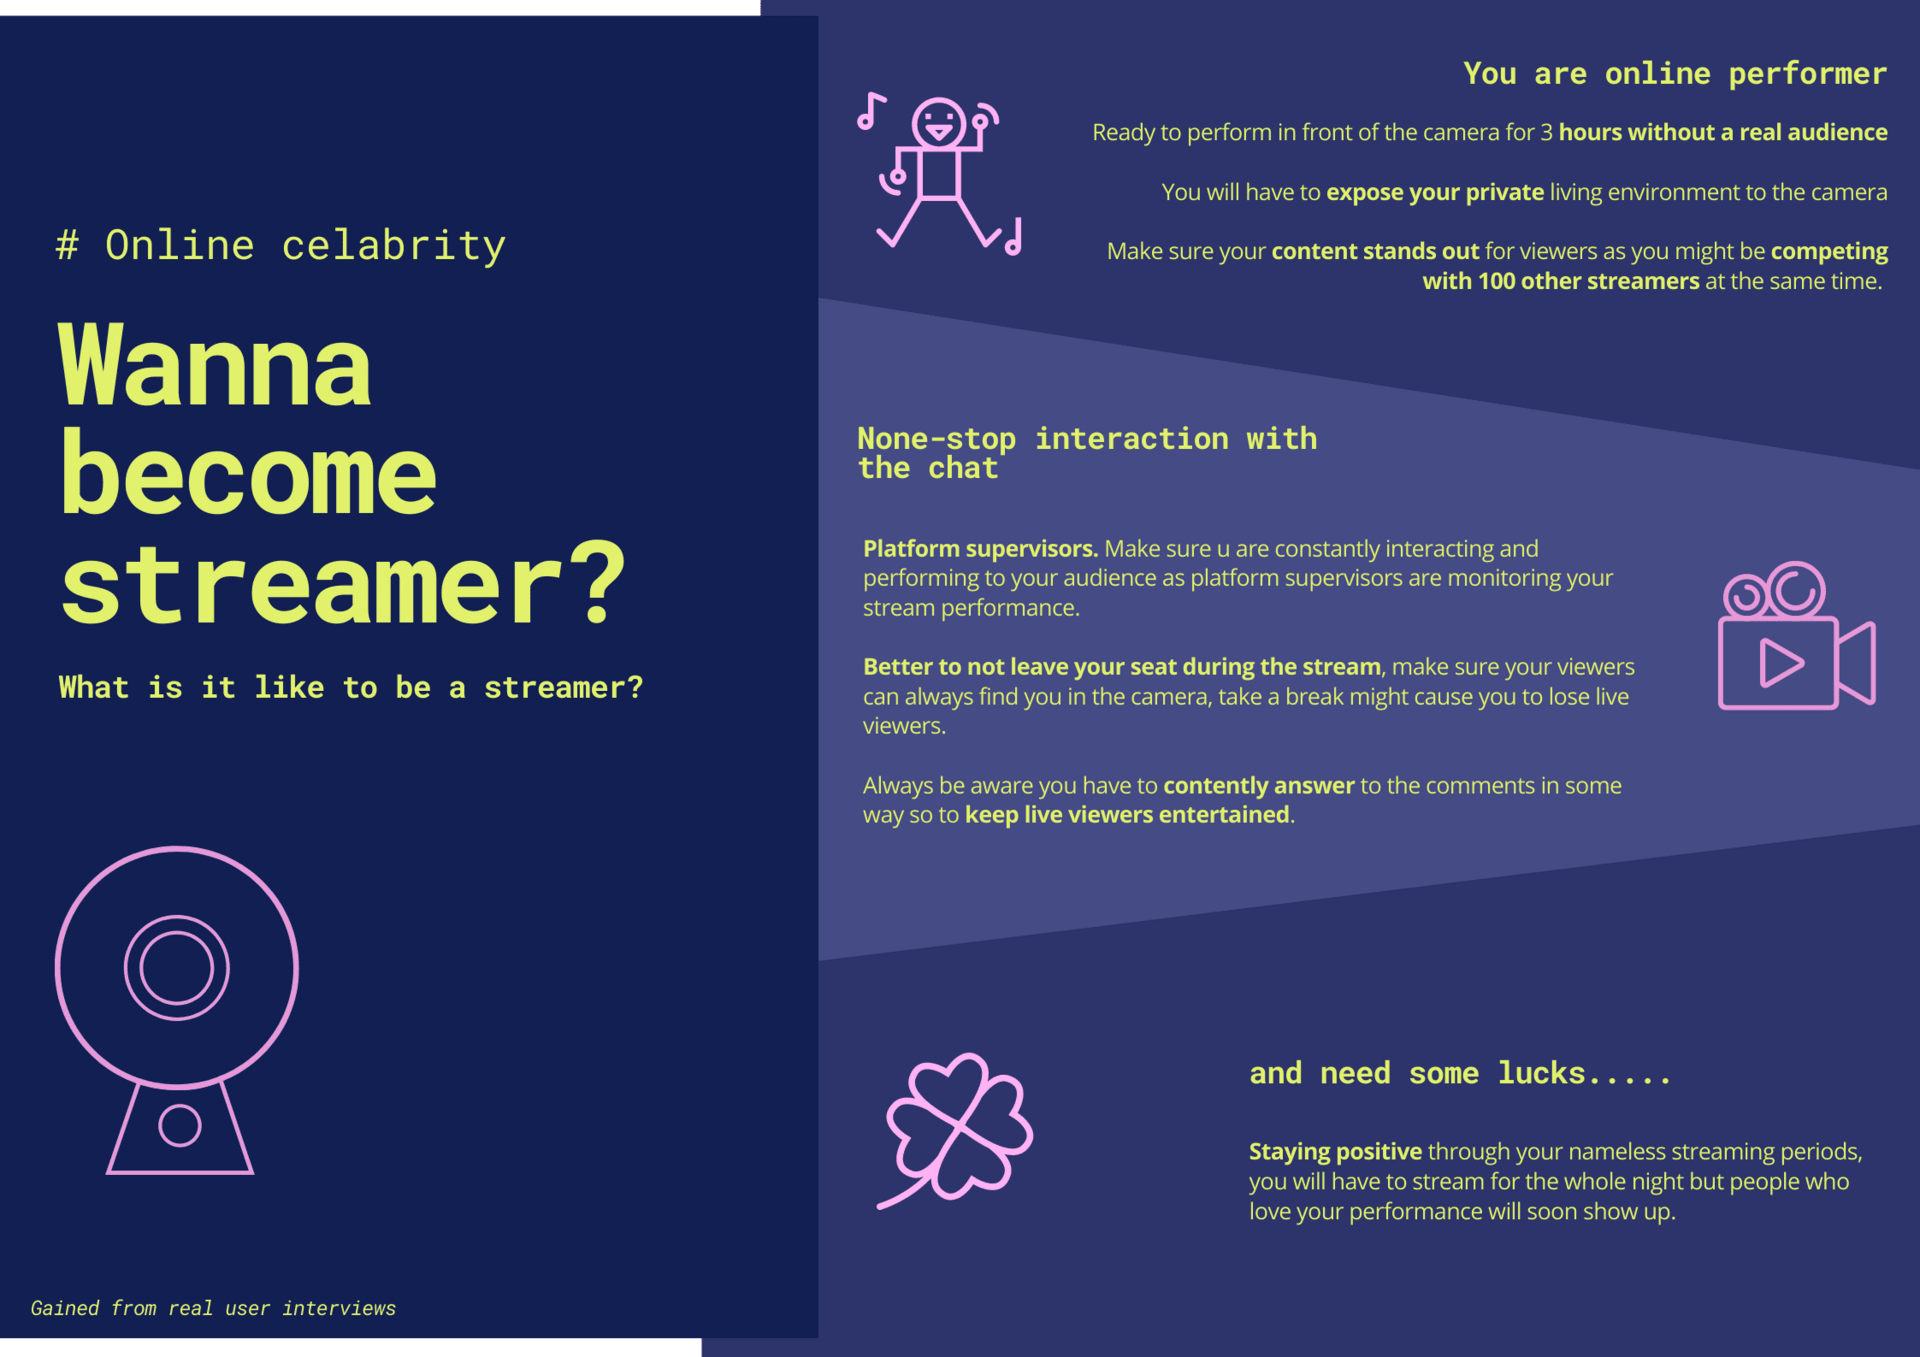 Fictionalized Poster: Streamer work condition insights